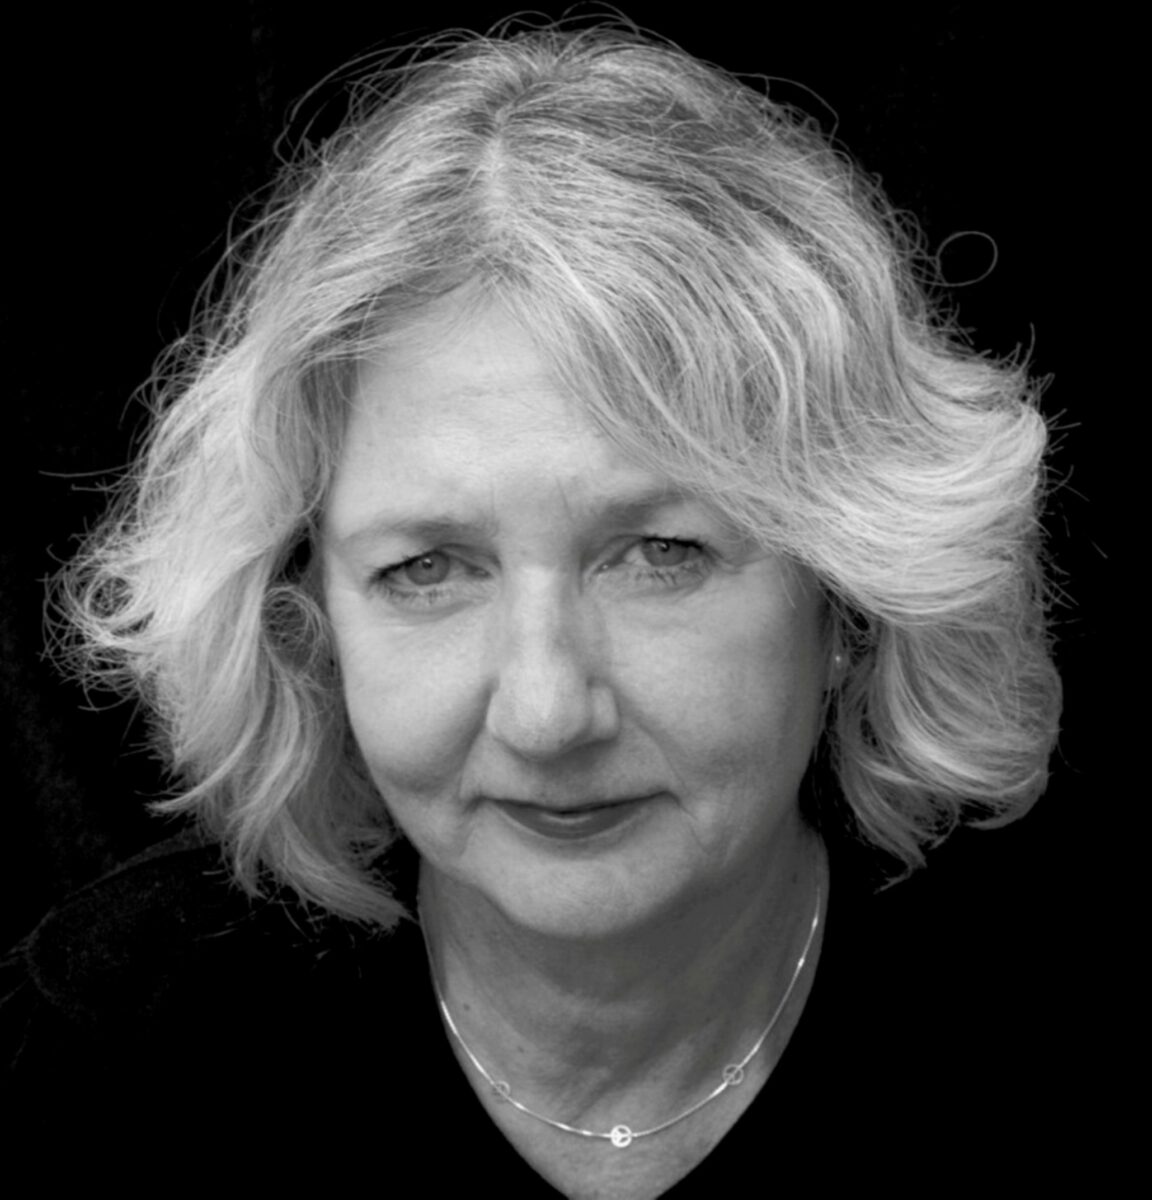 A black-and-white photo of poet Cora Siré. In a black background, black shirt, she has blondish/grey hair, wearing necklace and possibly red lipstick.She stares directly at the camera.